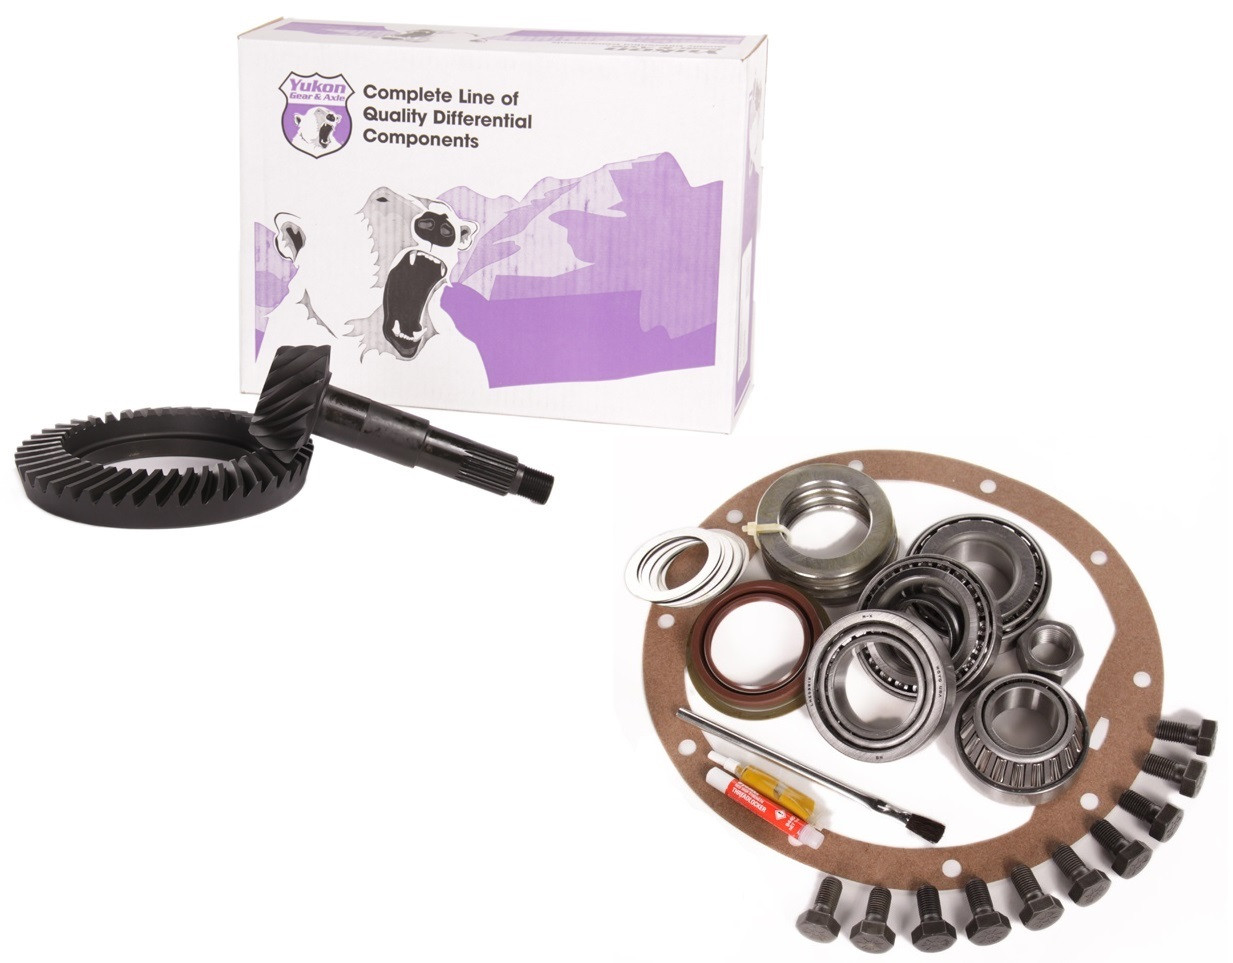 Install Kit CHEVY GM 8.5 10-Bolt Ring and Pinion 3.42 Ratio Gears & Master Bearing